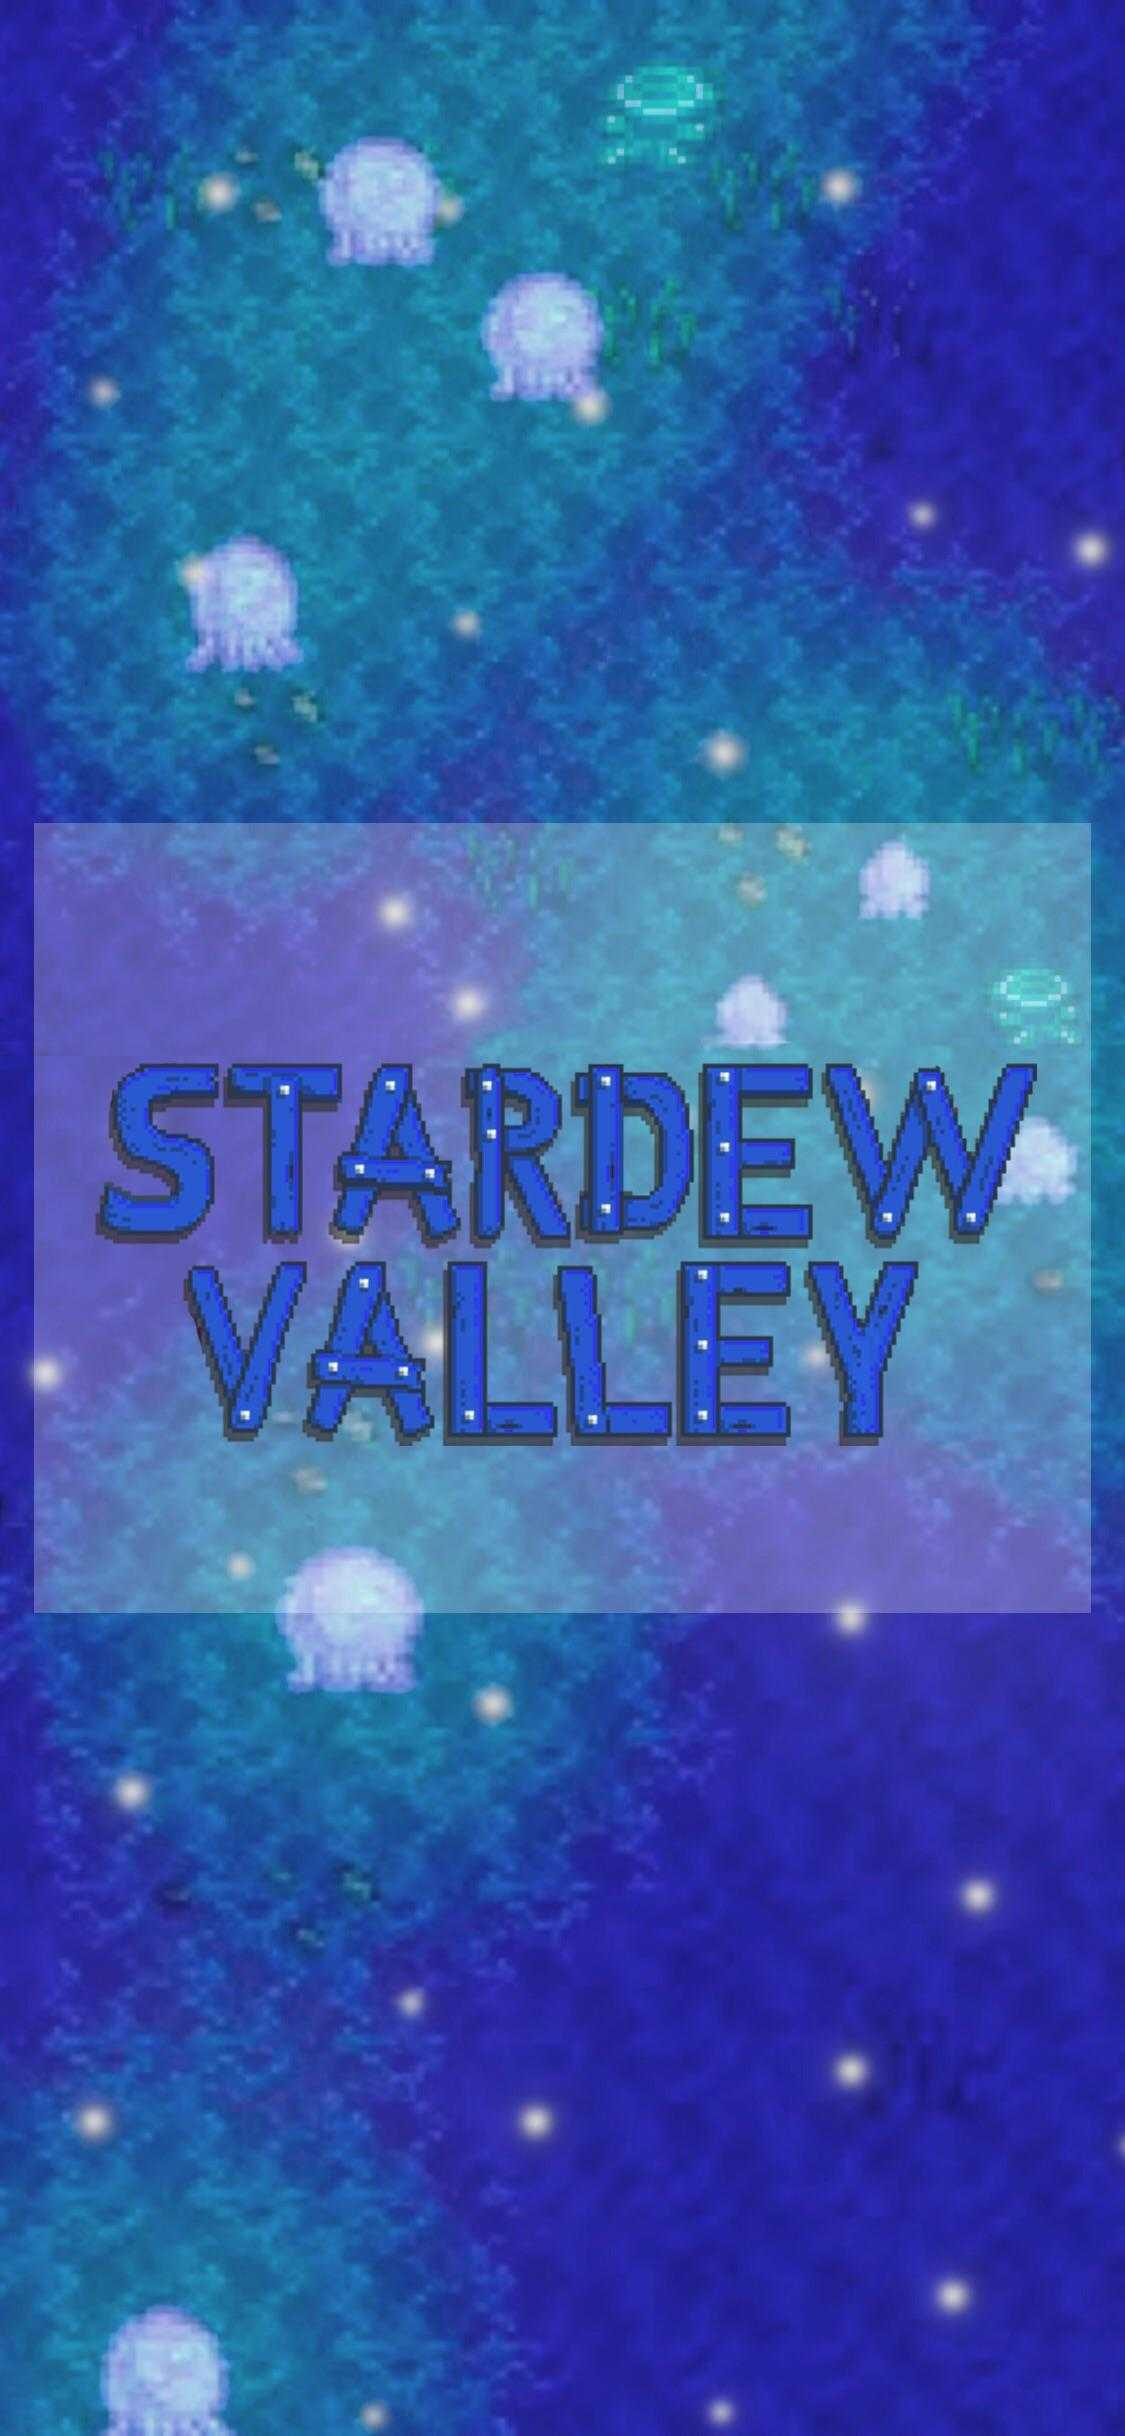 1125x2436 Stardew Valley Wallpaper Android Awesome Free HD Wallpapers